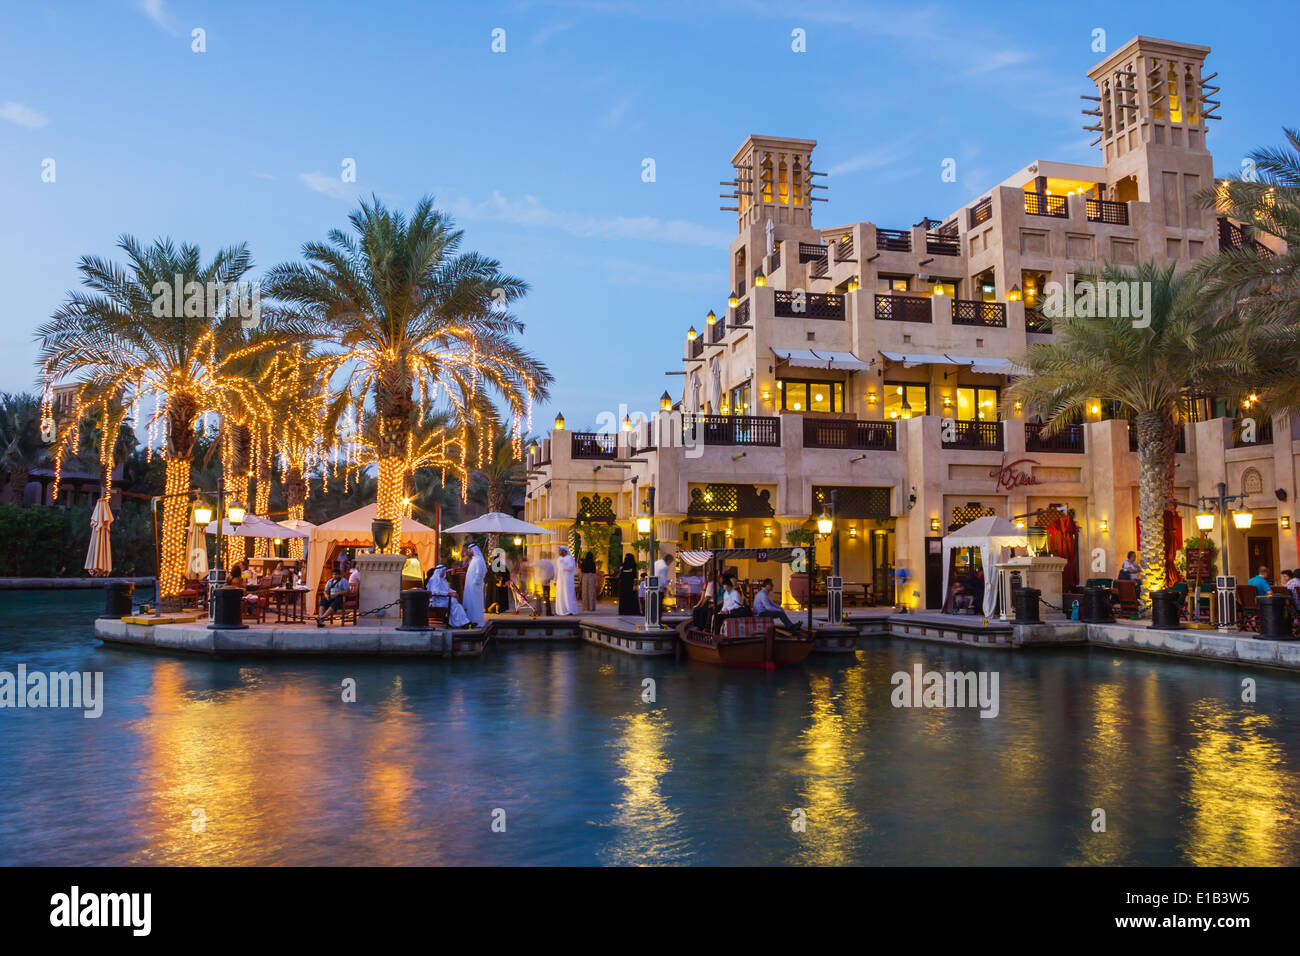 Night view of Madinat Jumeirah hotel, on November 15, 2012, Dubai, UAE. Madinat Jumeirah - luxury 5 star hotel with own artific Stock Photo